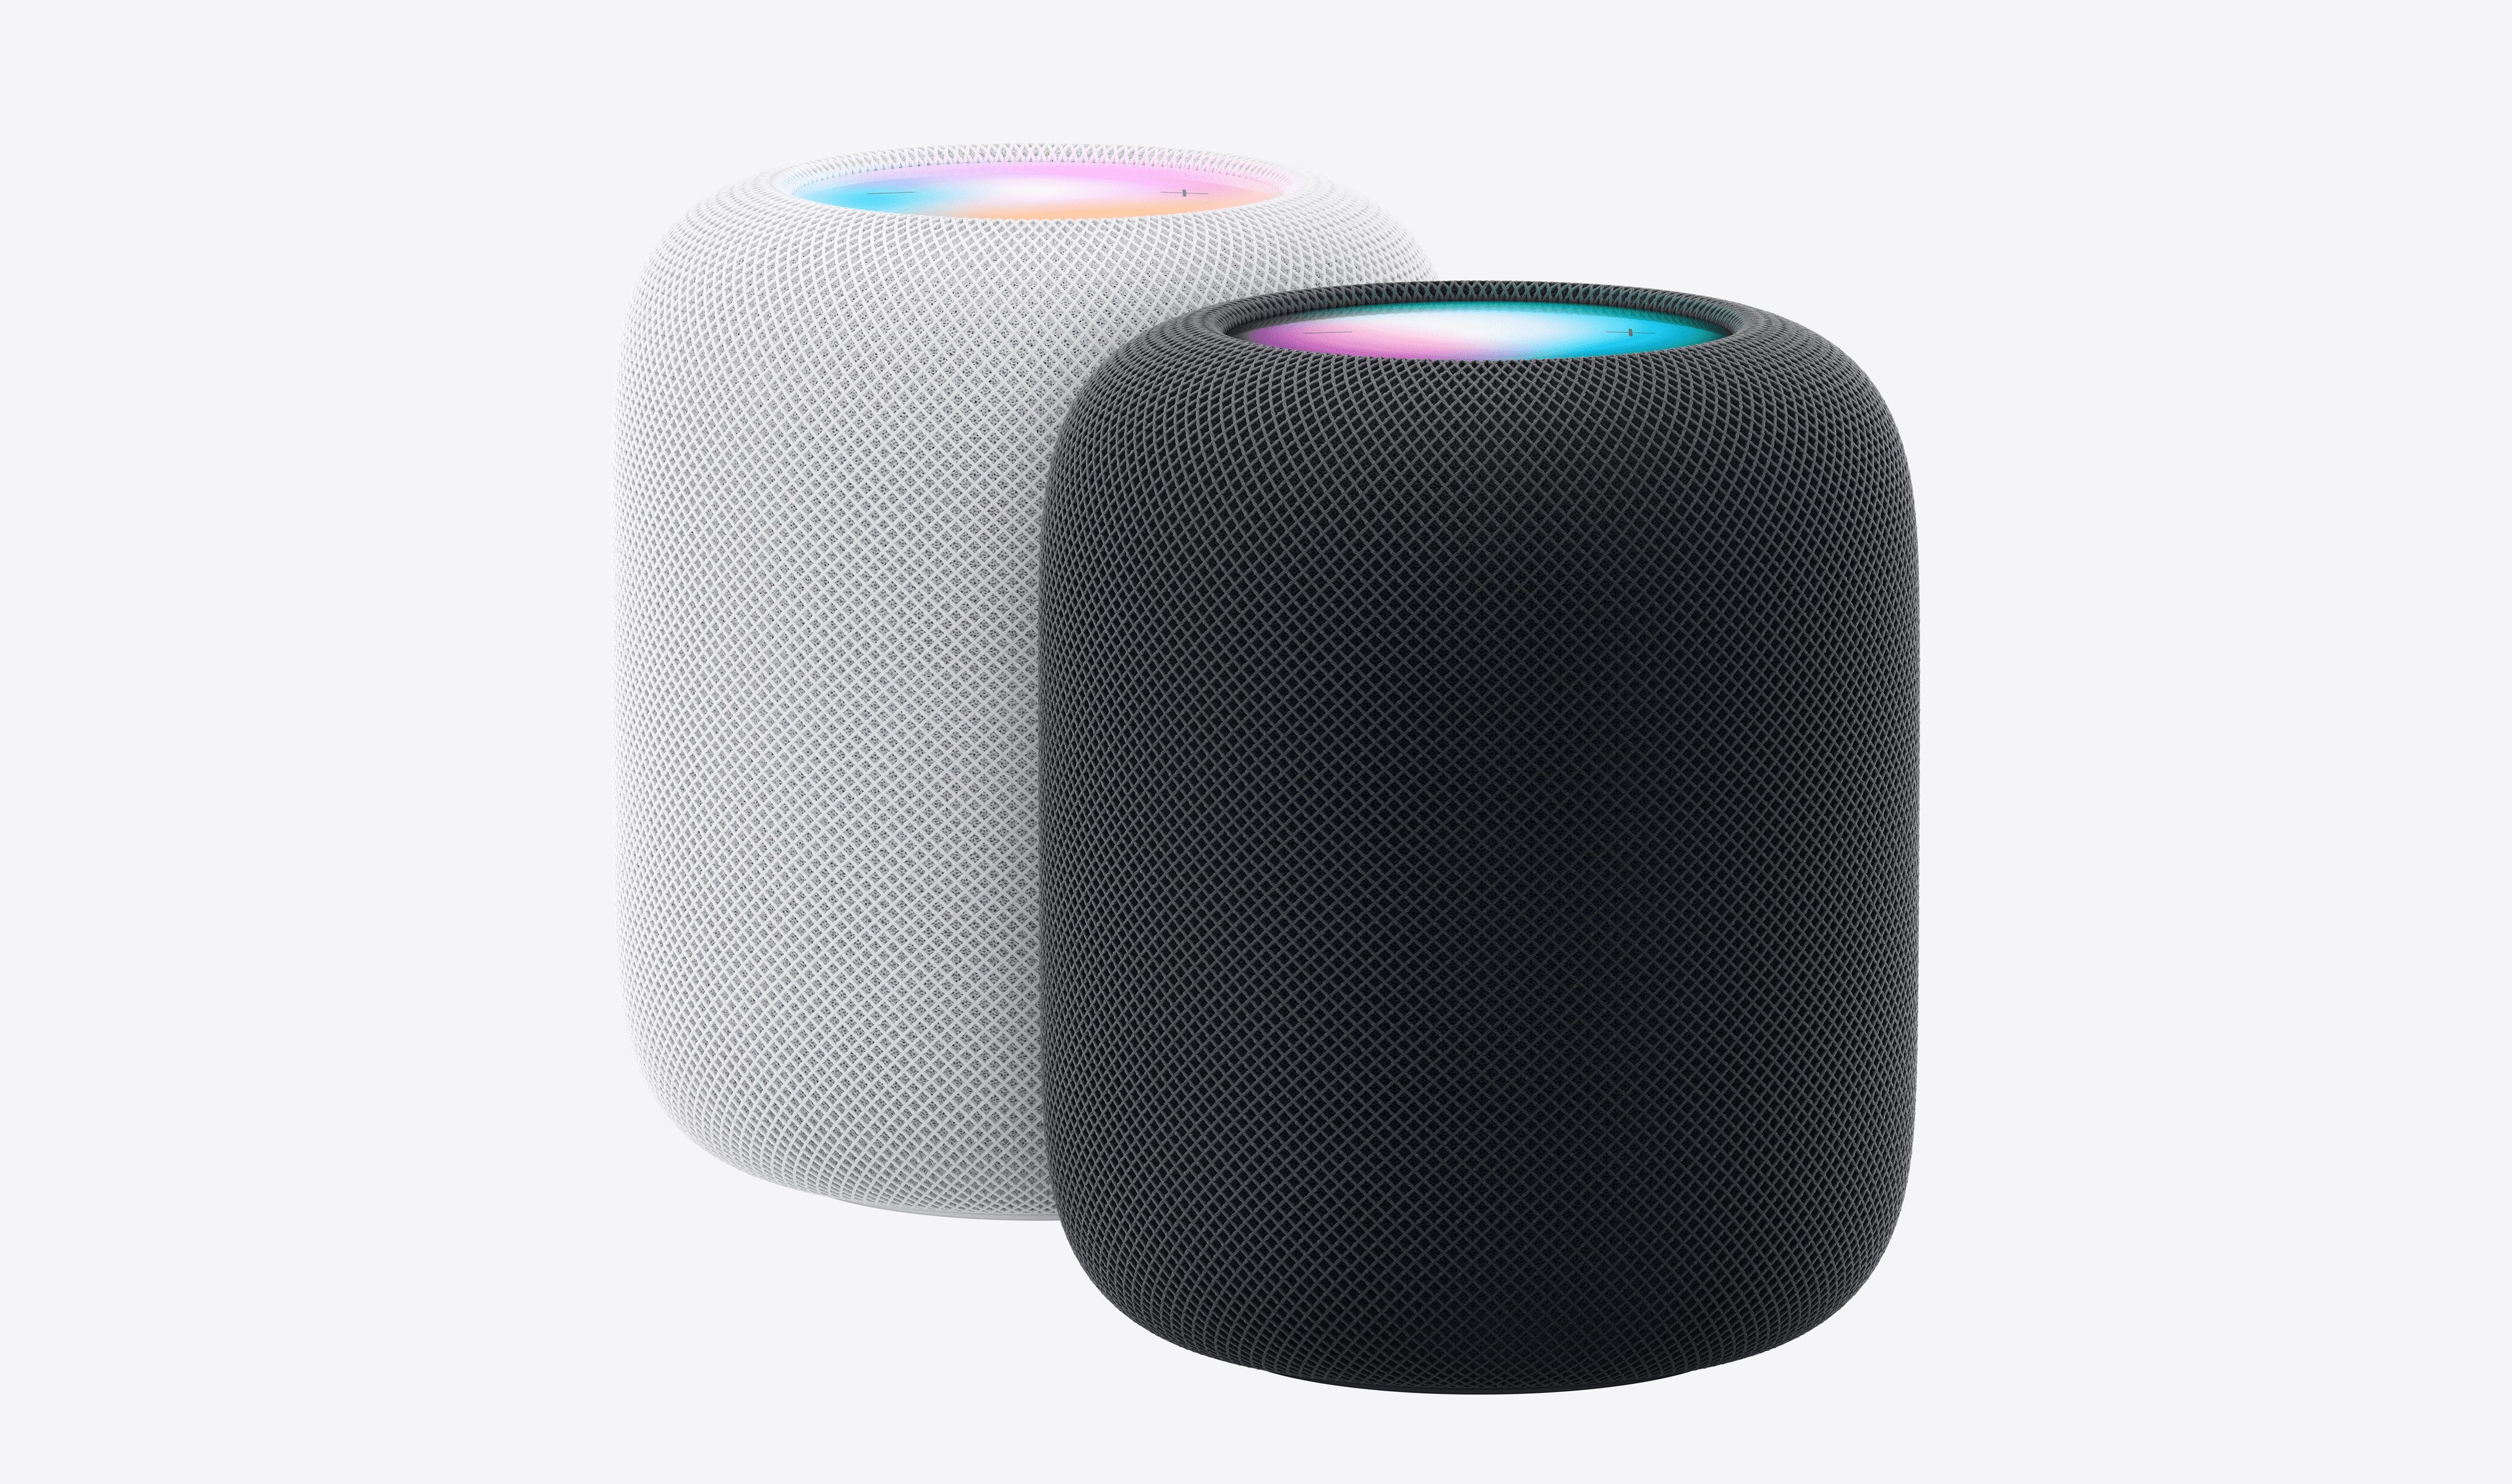 Apple Announces New HomePod for $299 With Full-Size Design, S7 